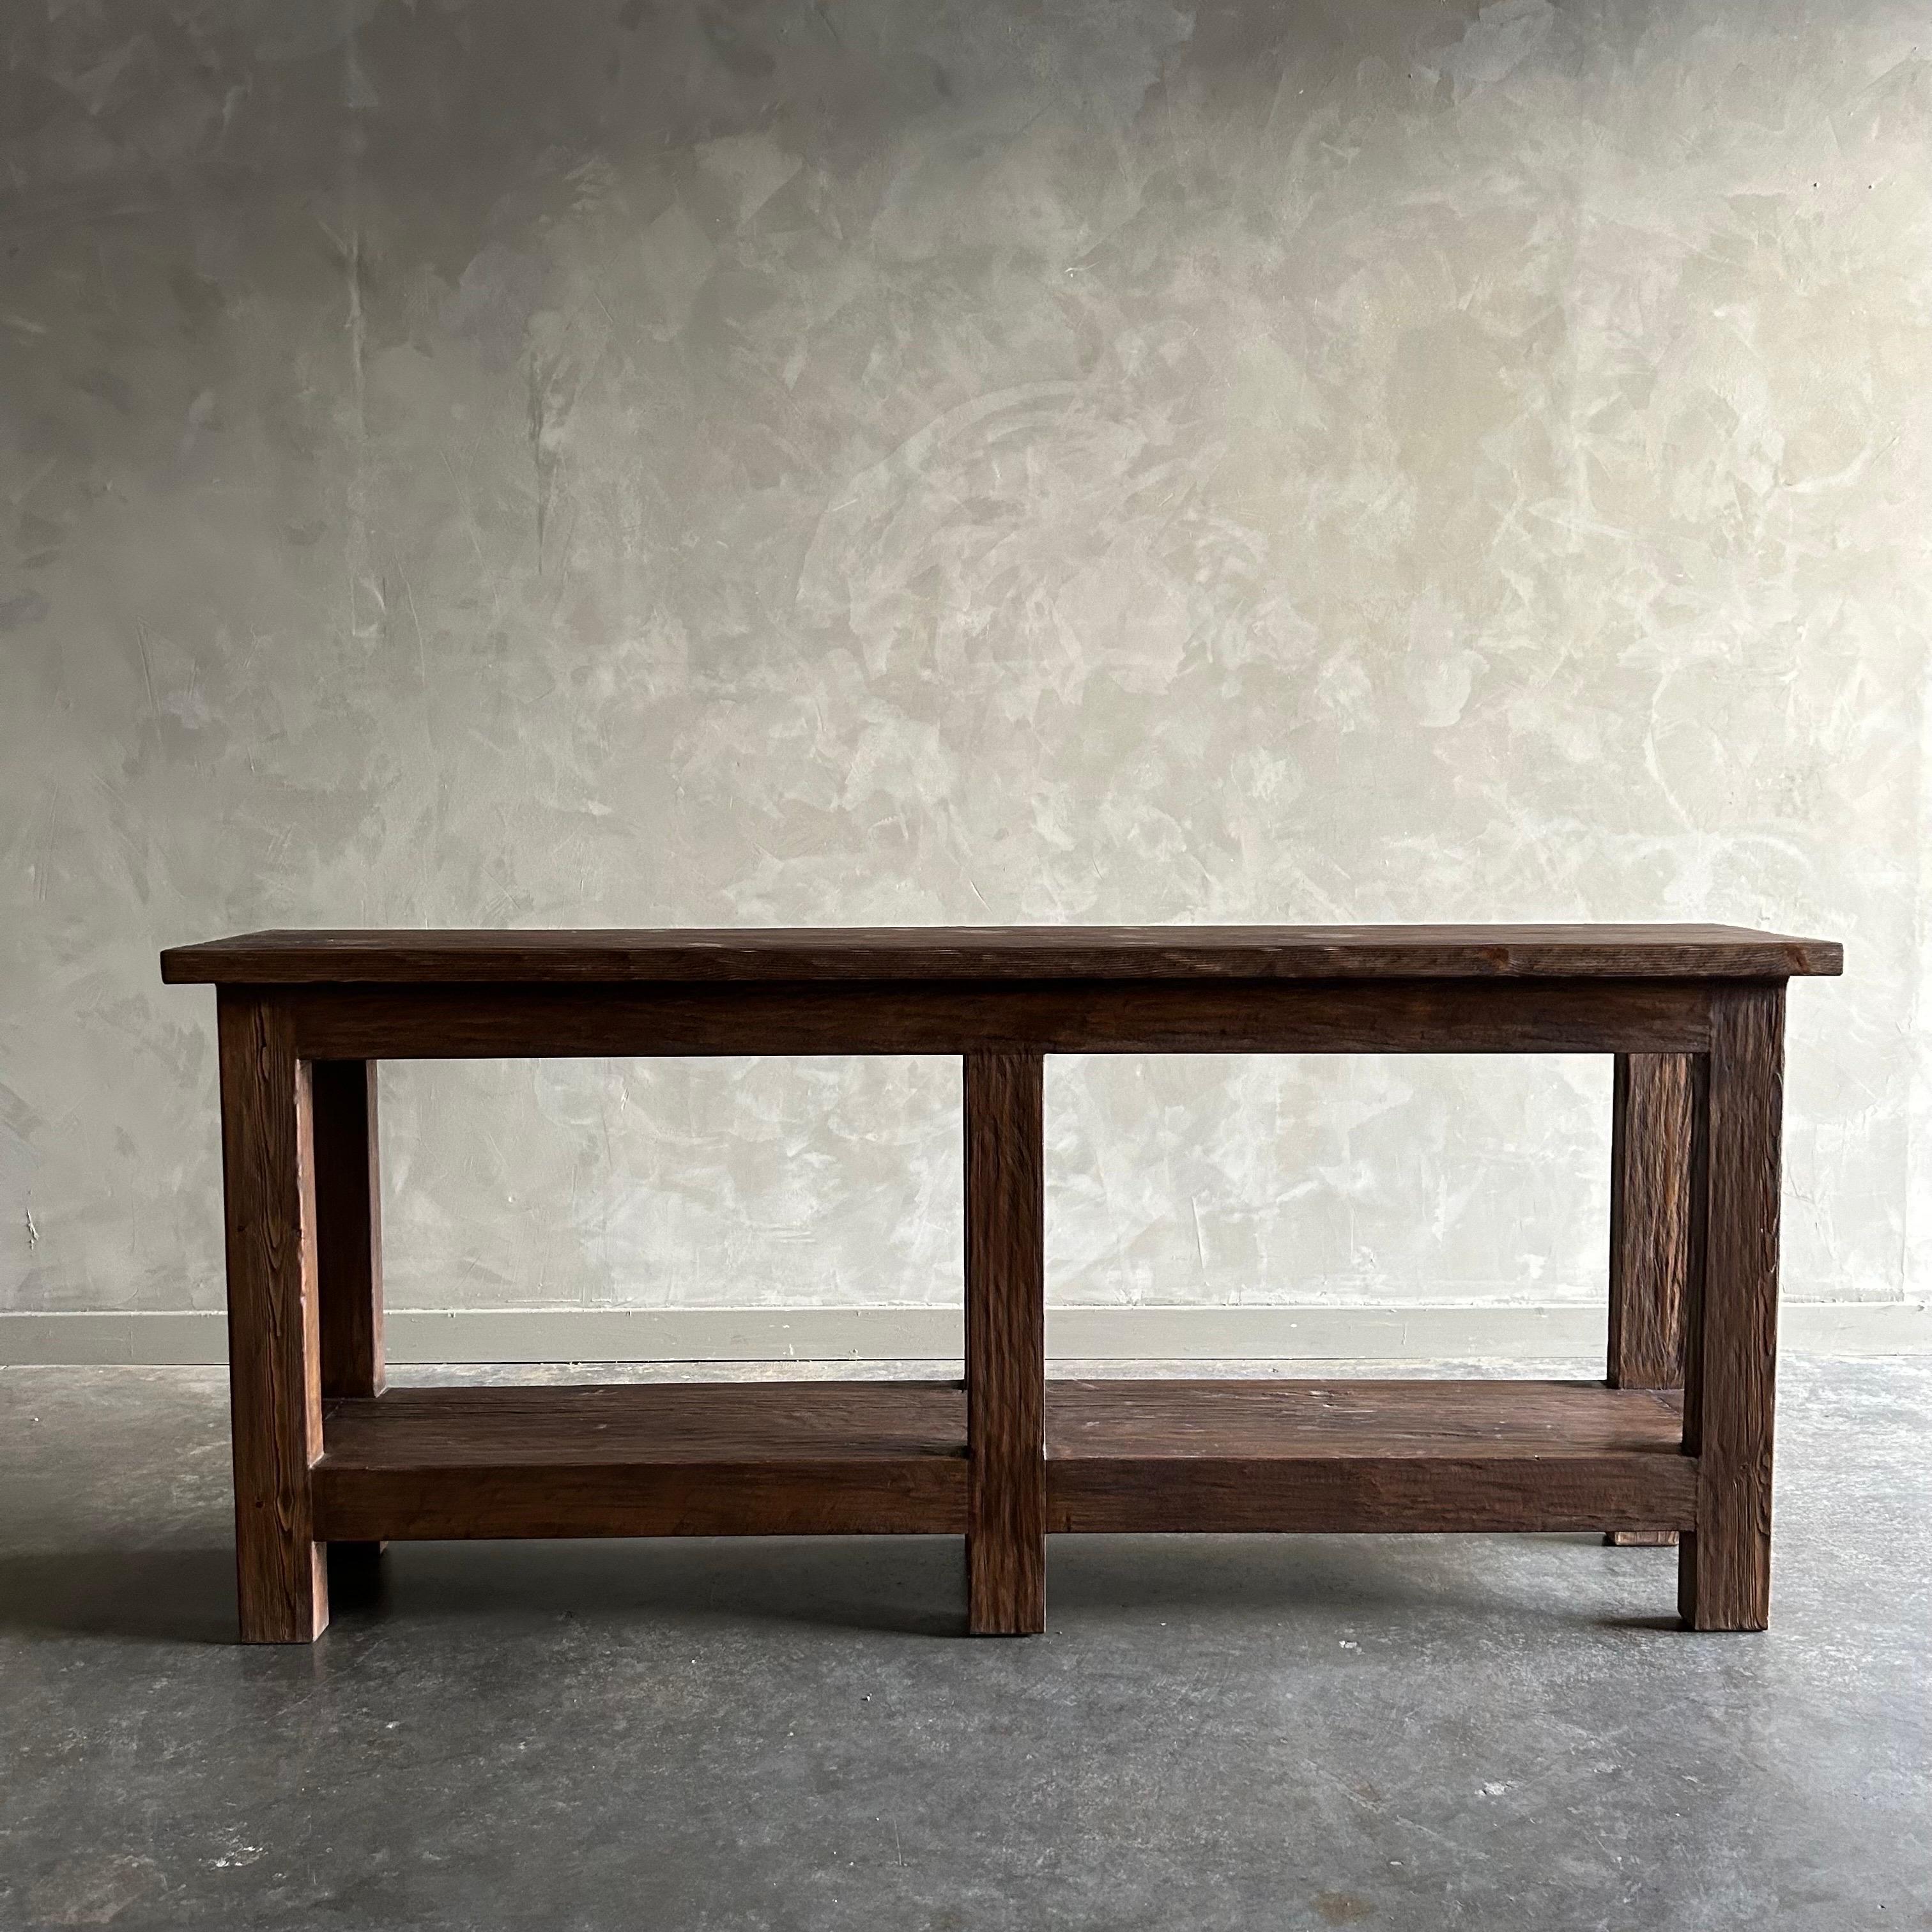 MORI CONSOLE DARK FINISH
Natural reclaimed elm wood console in a dark walnut stain that is beautifully crafted and serves as the perfect storage solution for any space. Since this is made from vintage reclaimed materials, there may be some